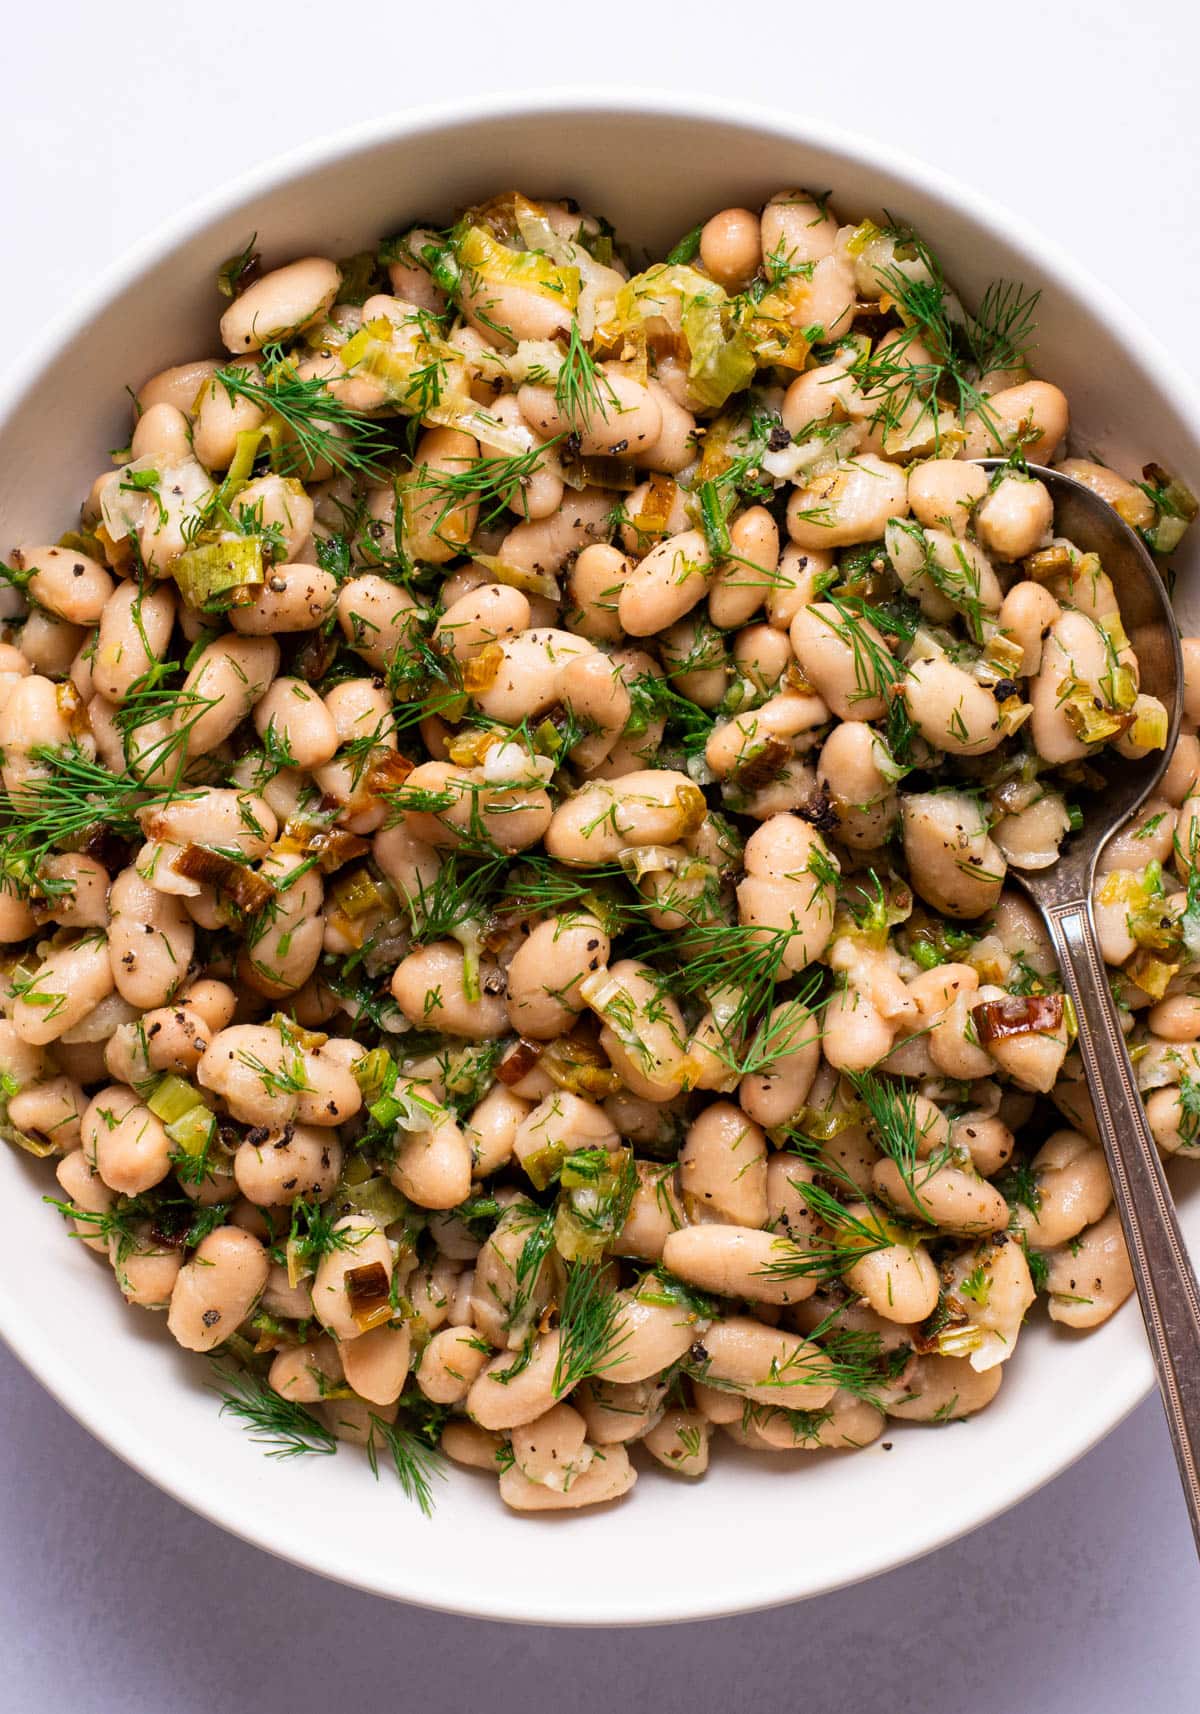 Herby cannellini bean salad in a white bowl.